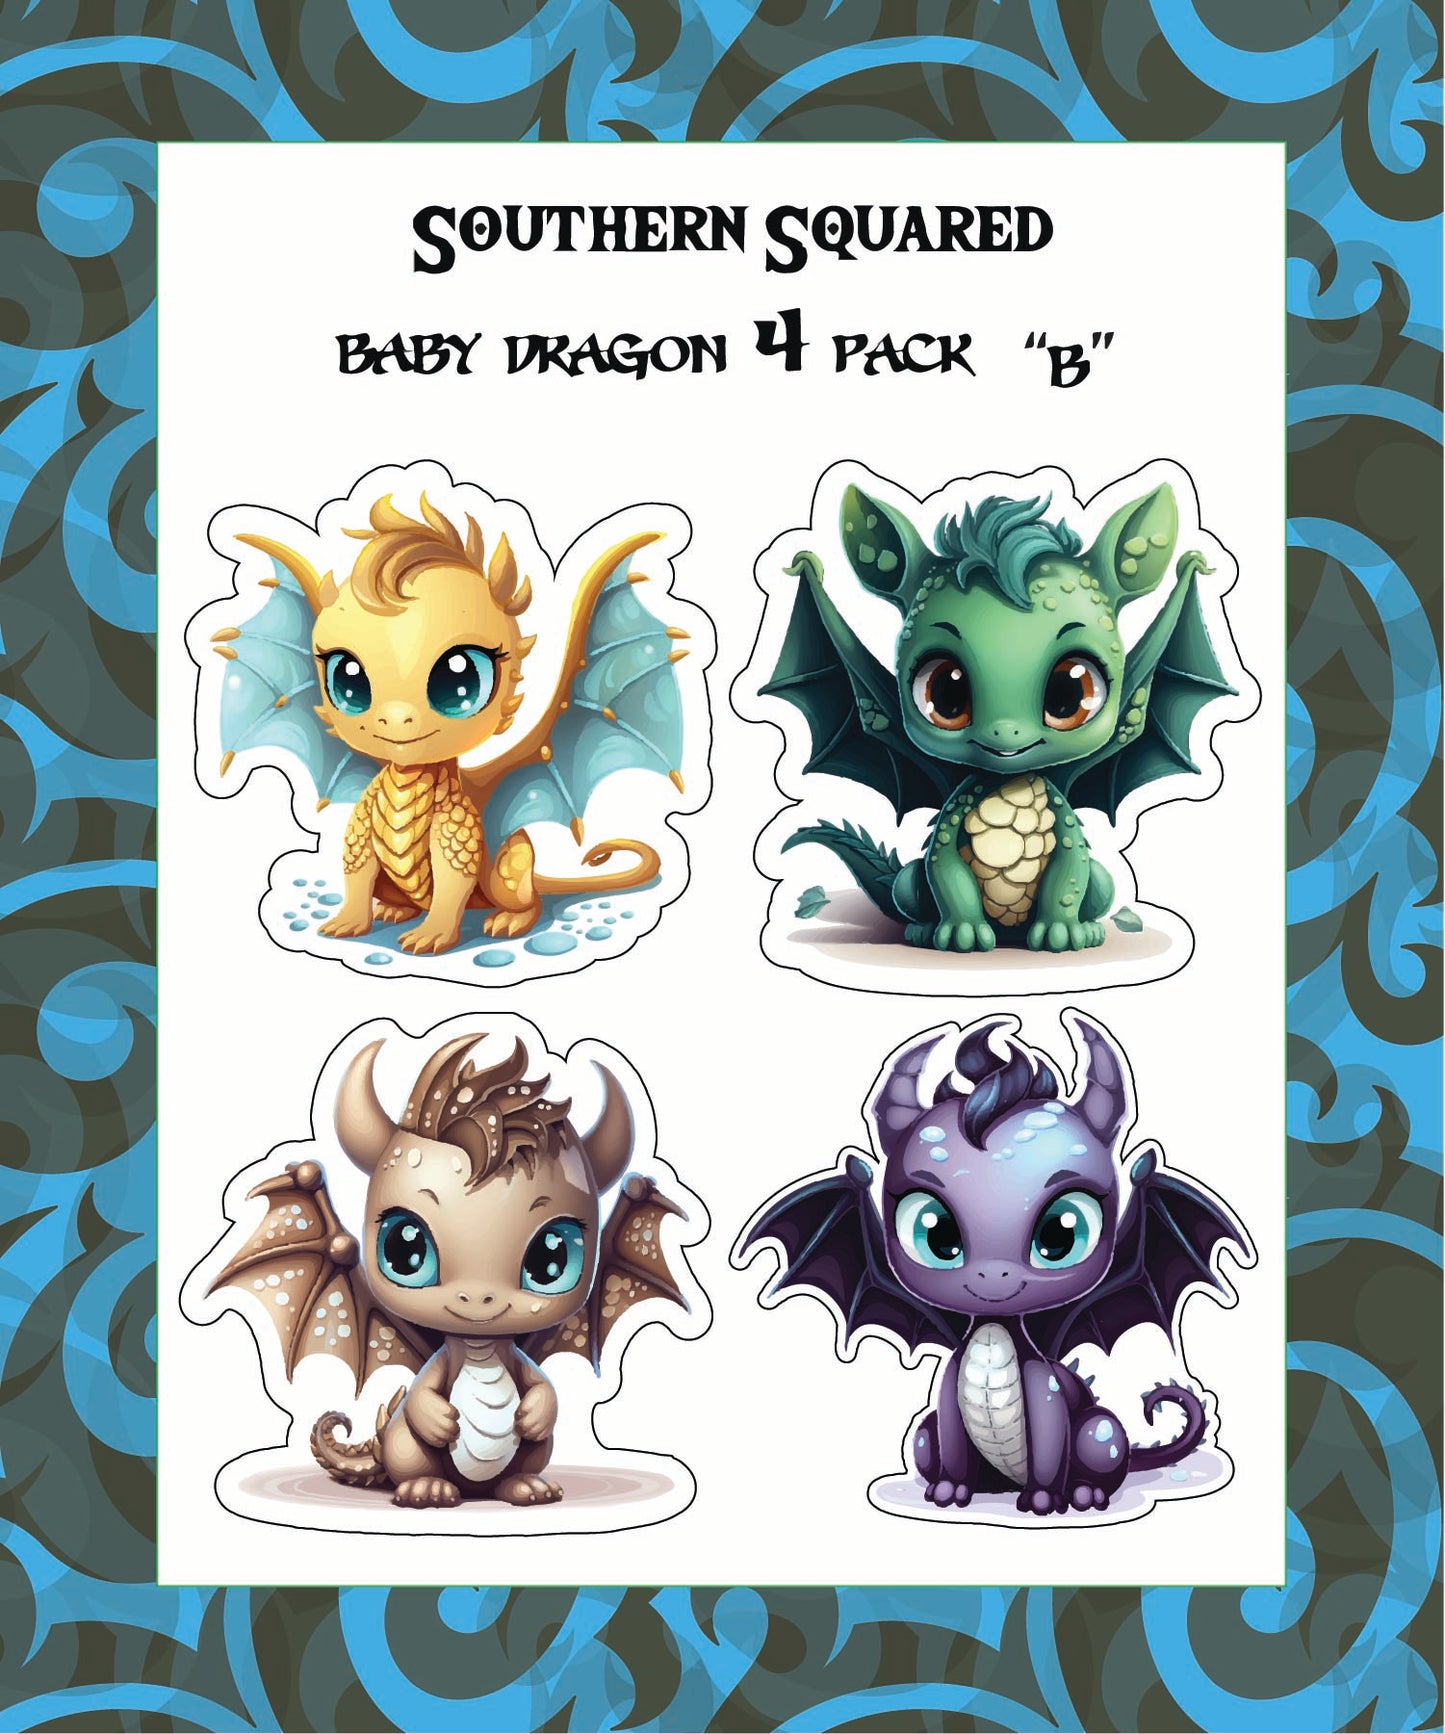 Sticker: The Adorables (Baby Dragon Sticker Pack B)